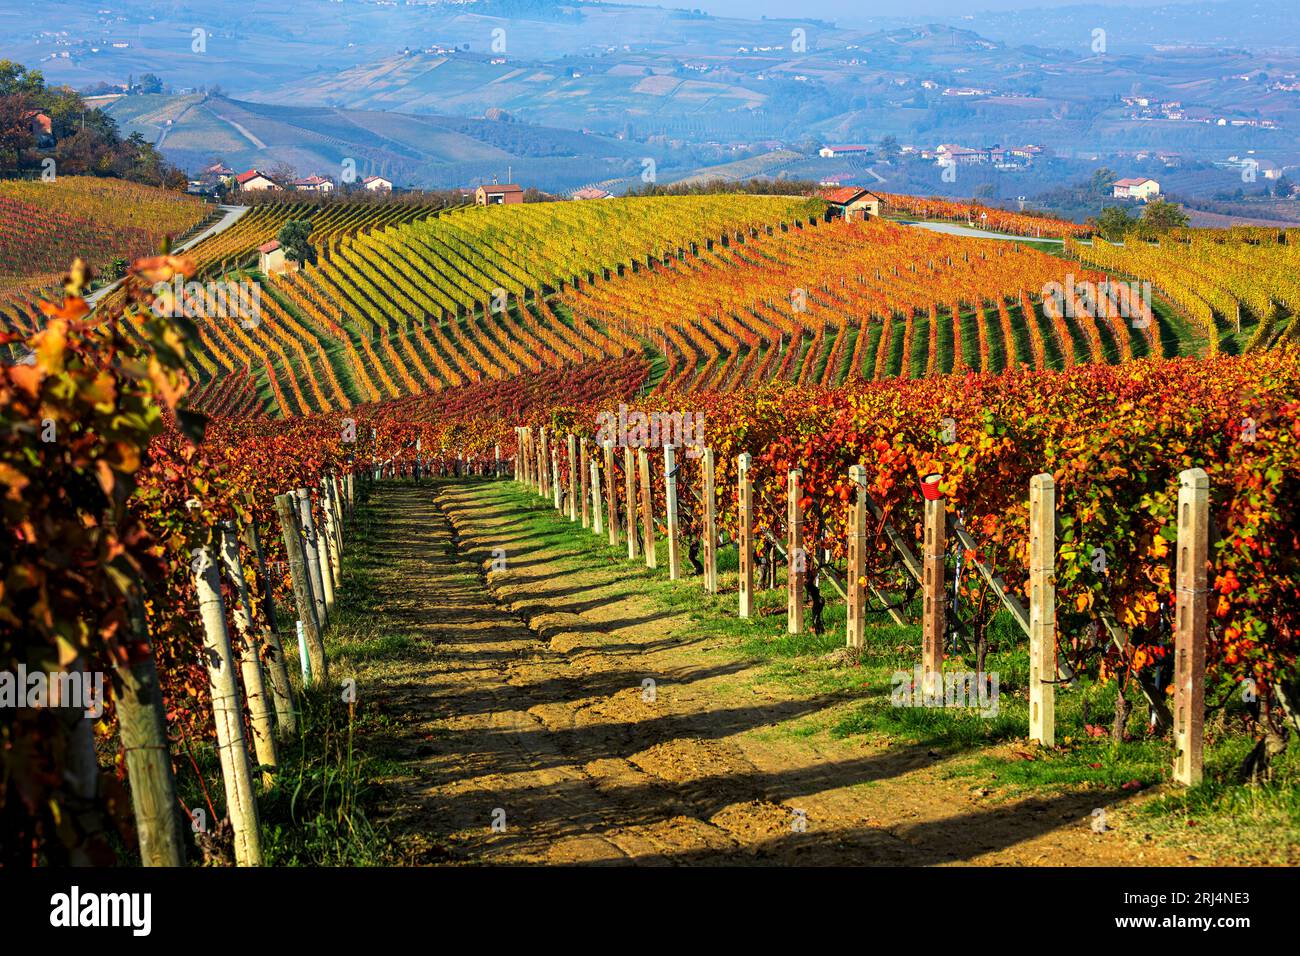 Rows of the colorful autumnal vineyards on the hills of Langhe in Piedmont, Italy. Stock Photo